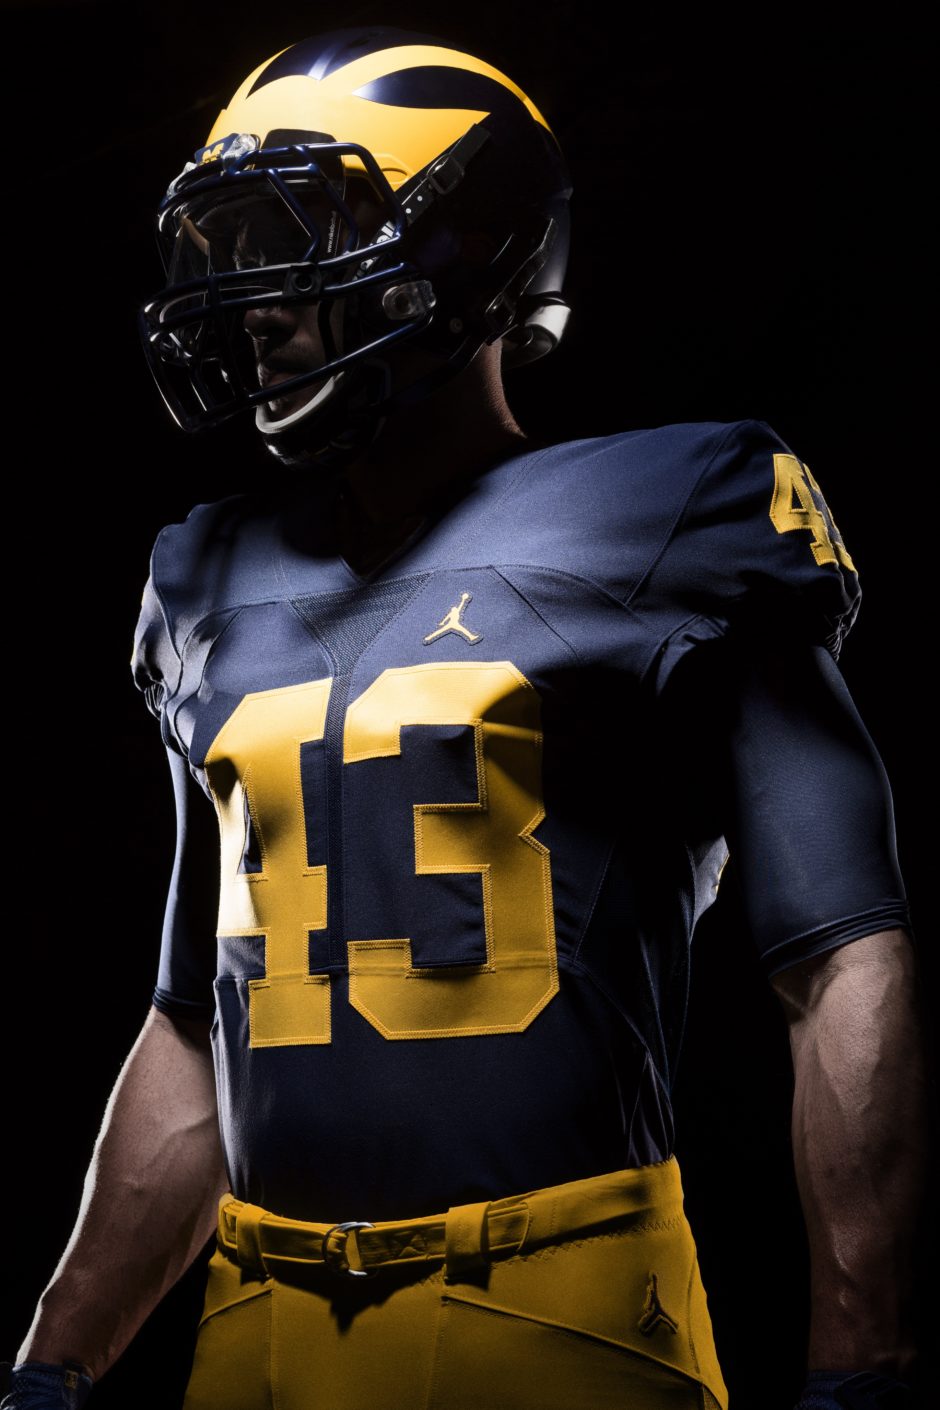 First Look At The Jumpman Branded Michigan Wolverines Football Uniforms